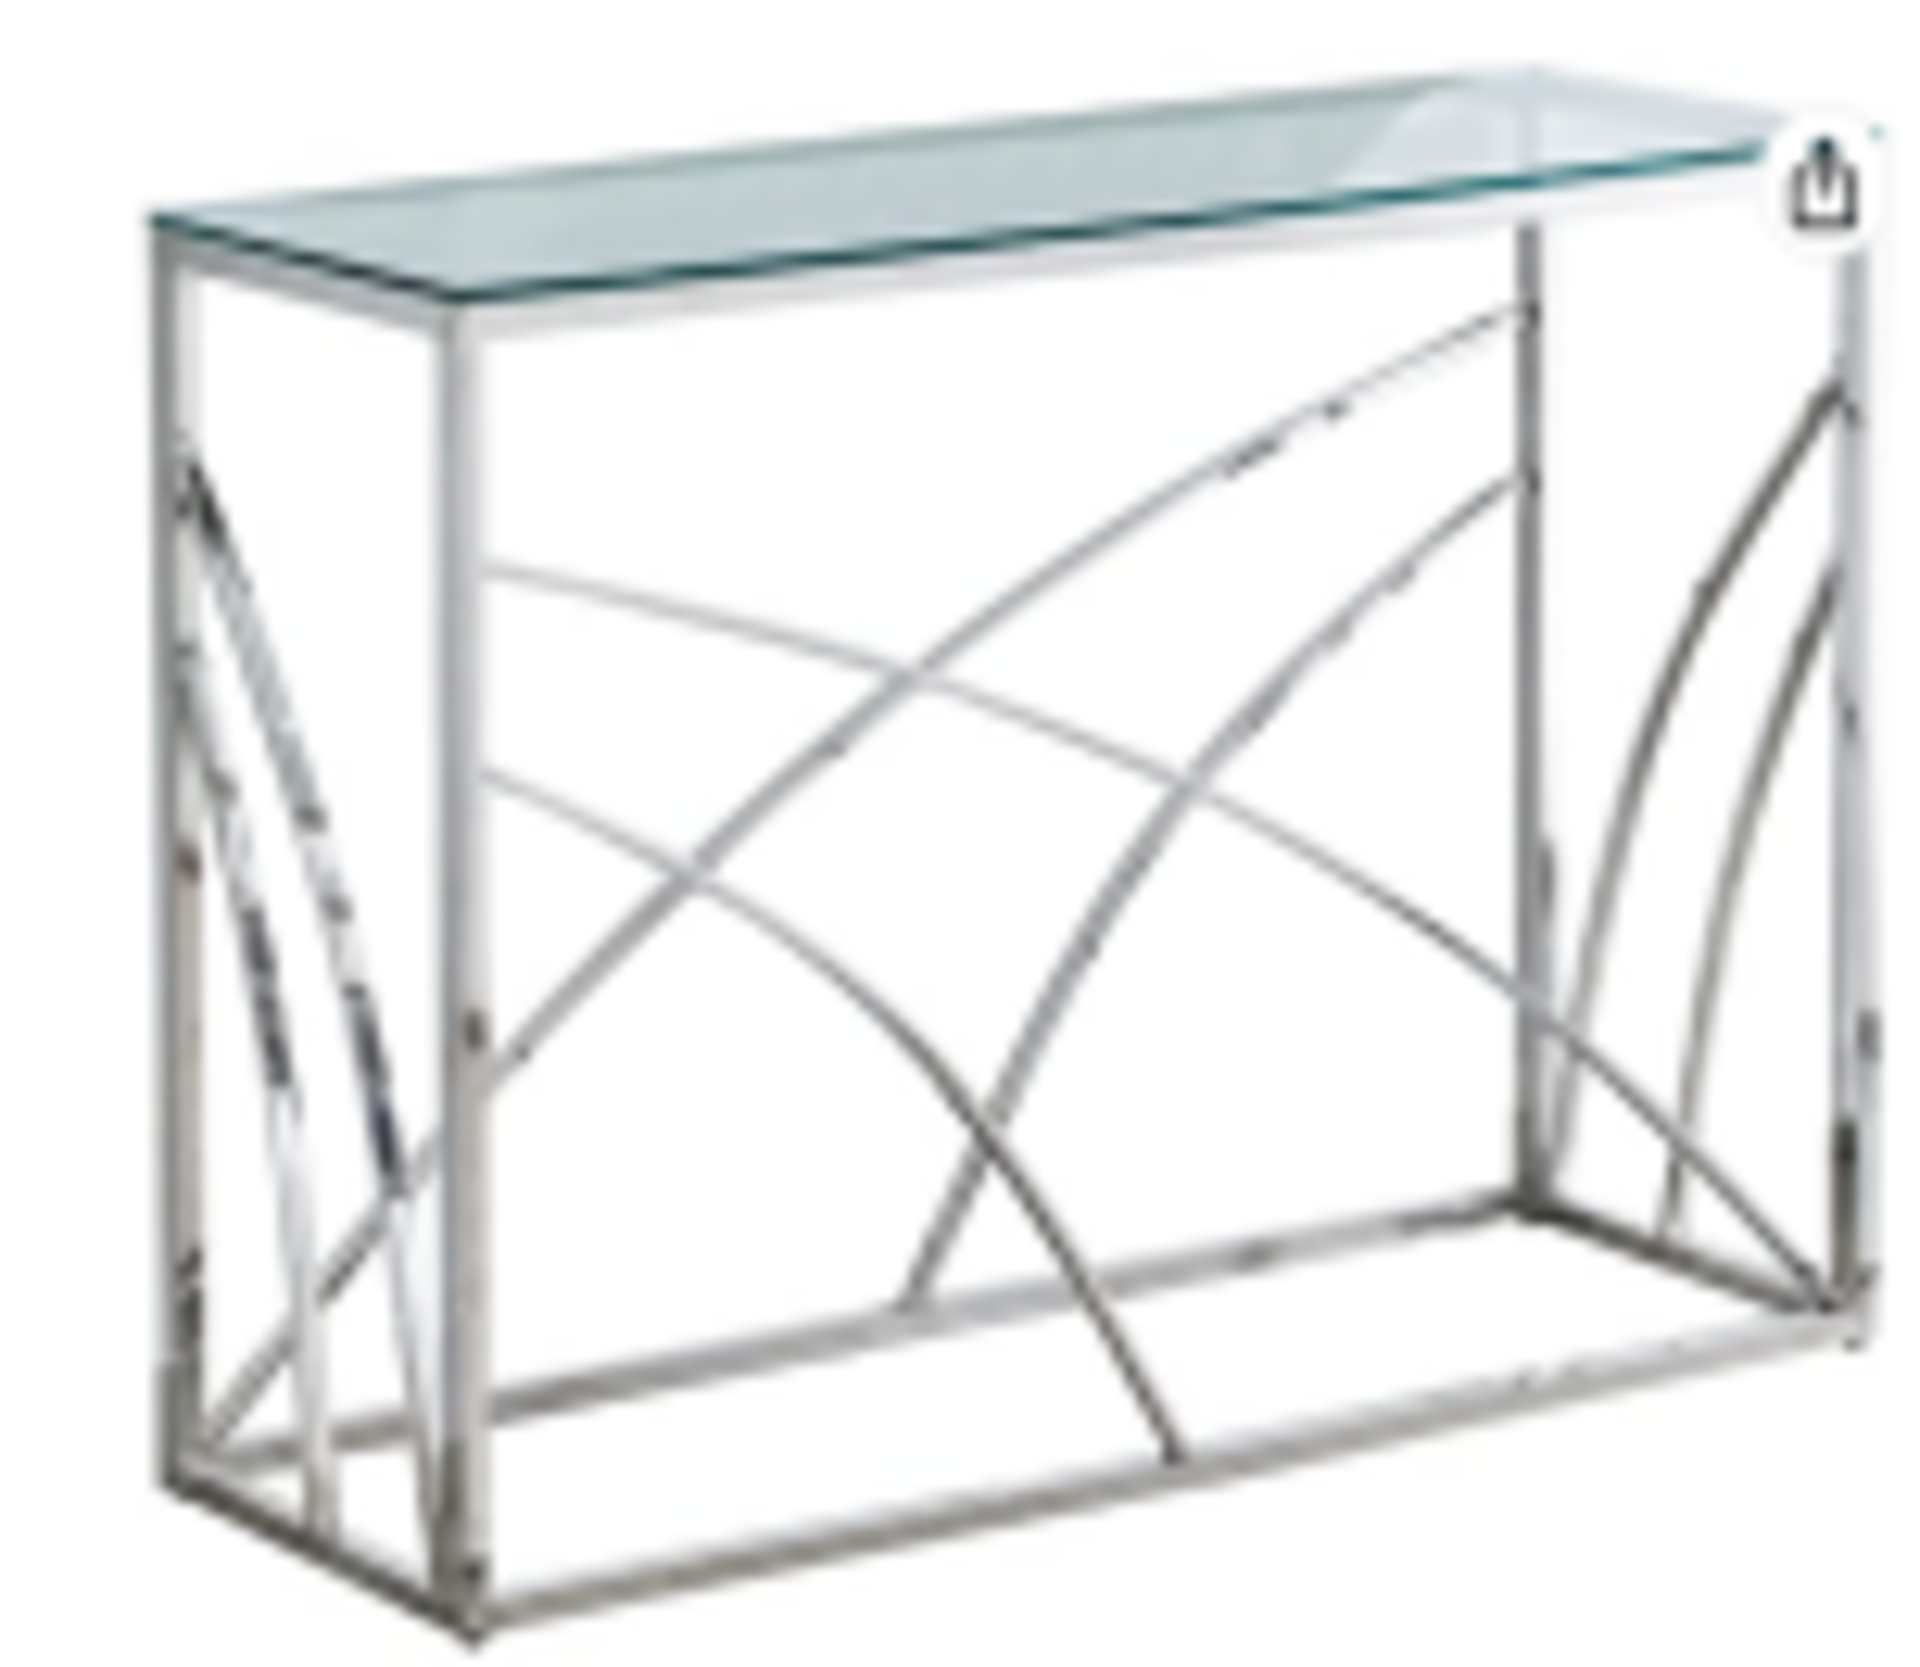 BRAND NEW STAINLESS STEEL CONSOLE TABLE WITH A GLASS TOP IN CHROME 120CM (JHAS55) RRP £229